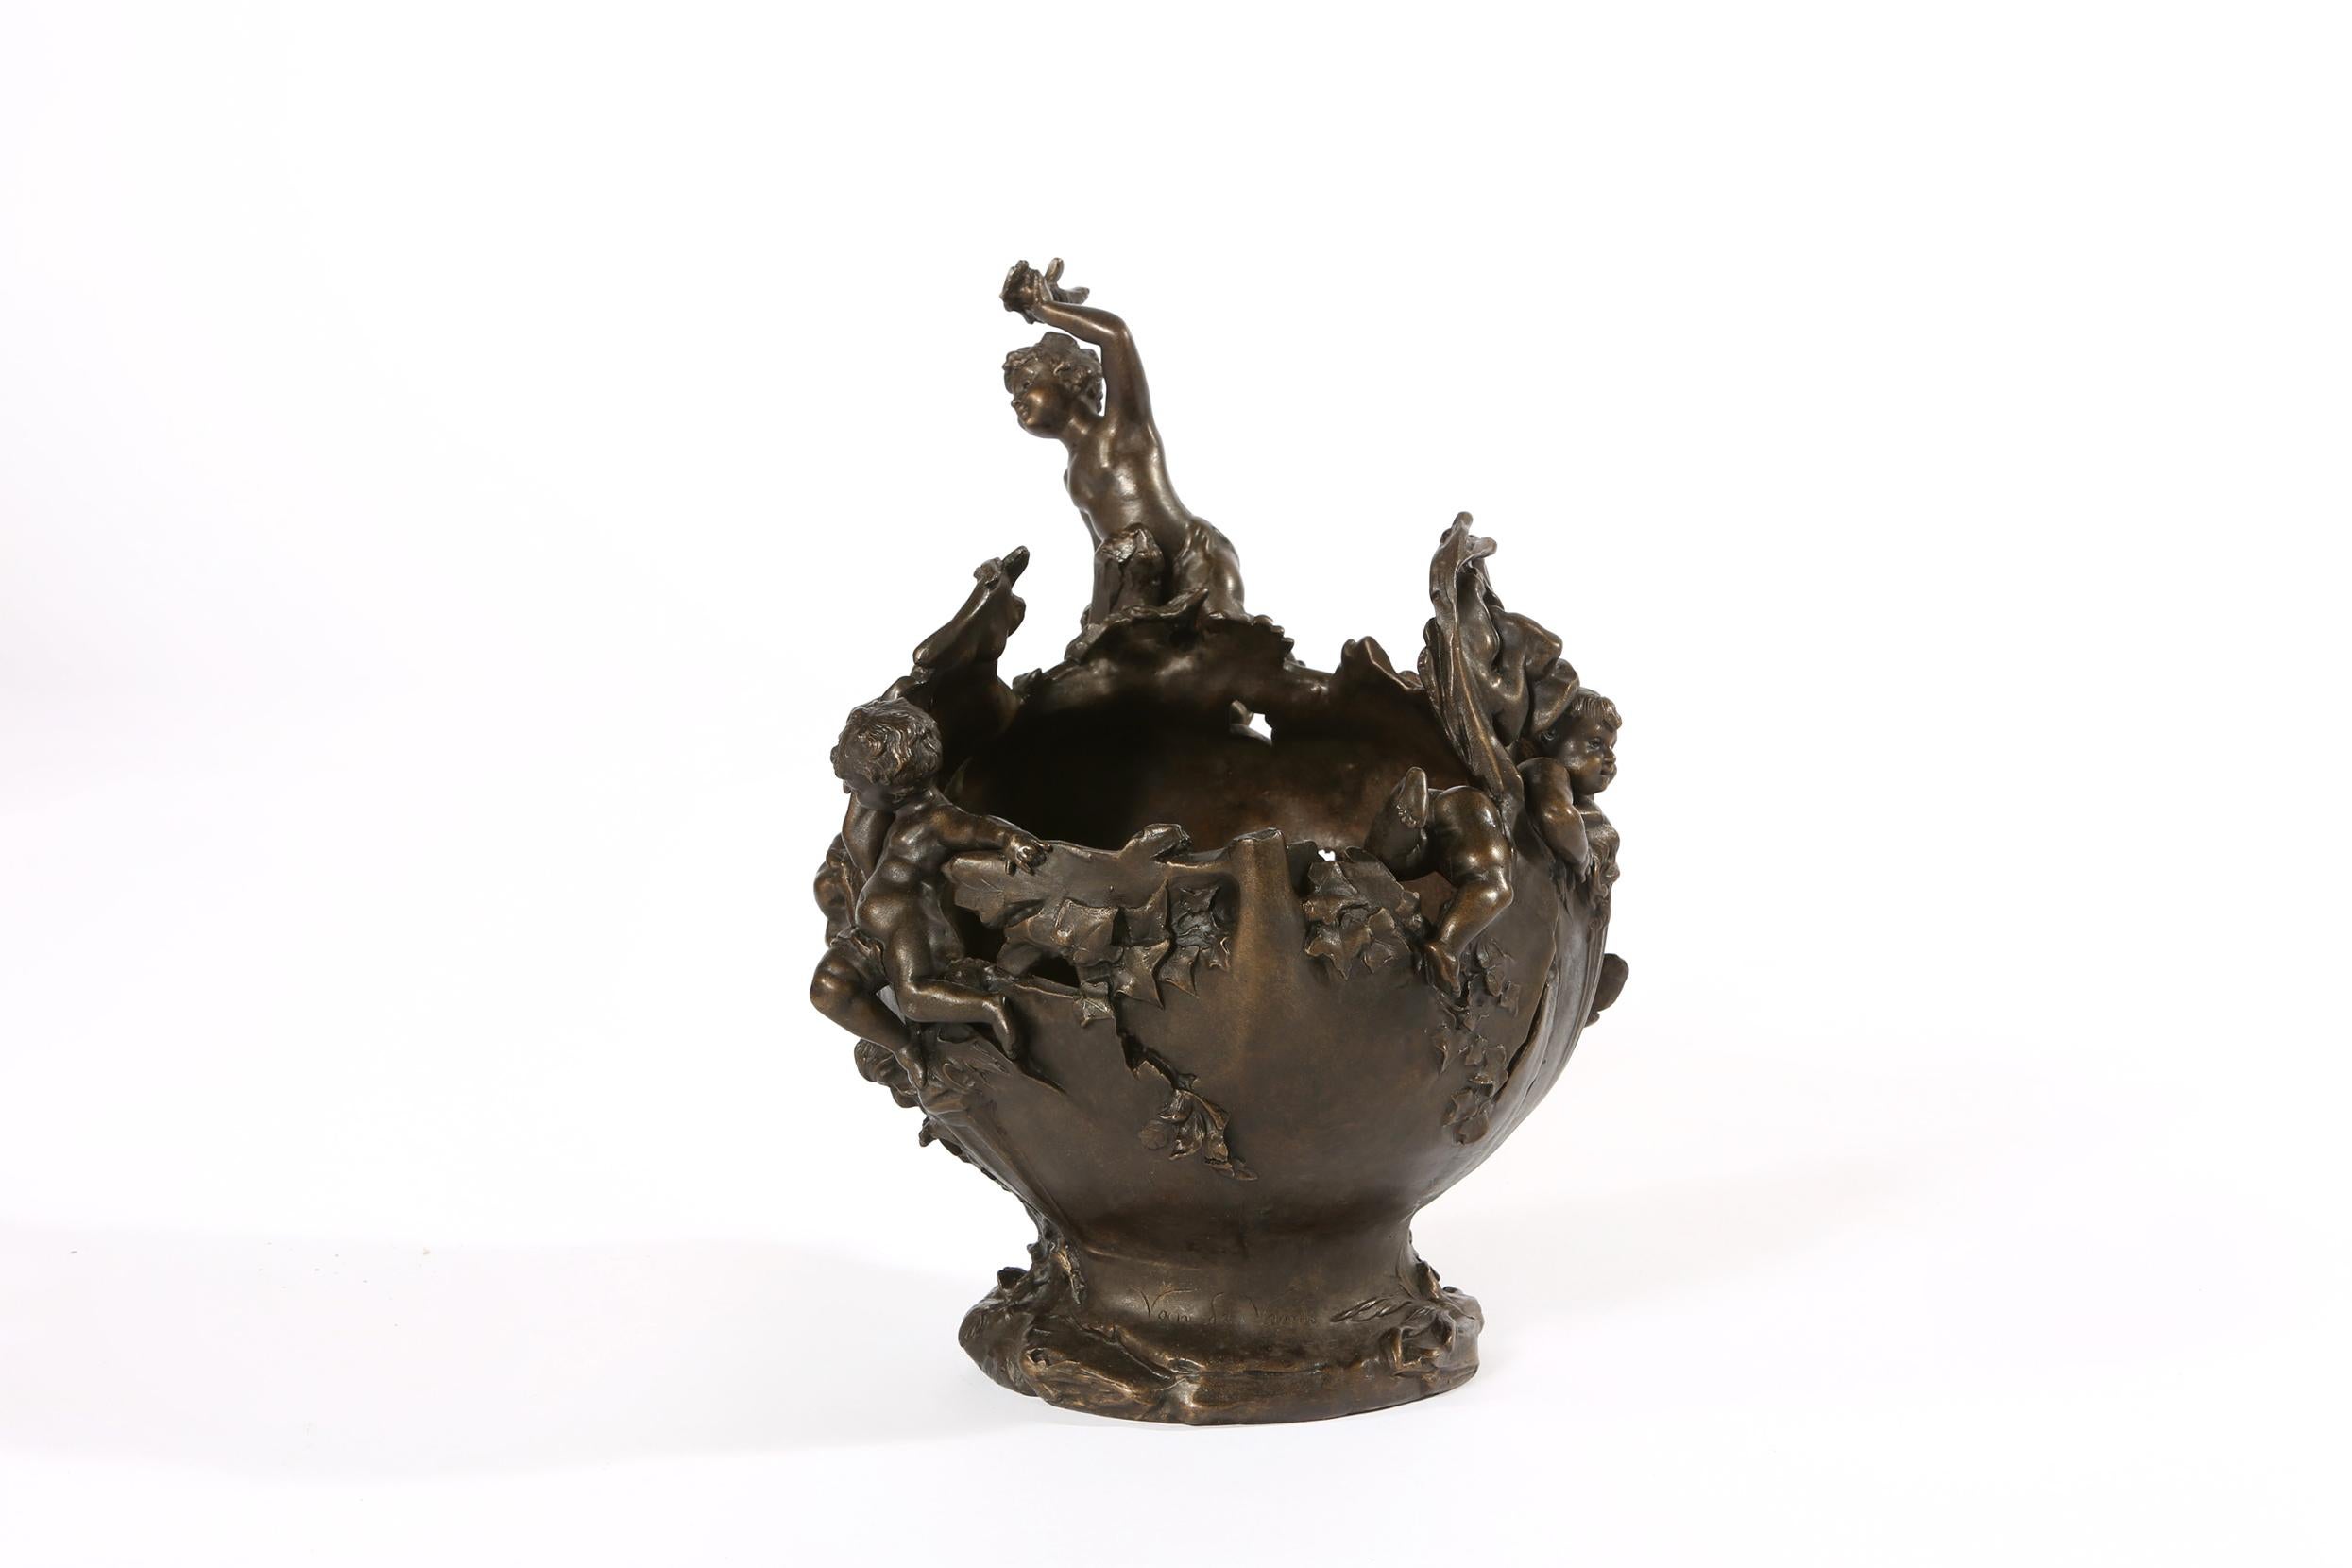 Mid-20th century tall bronze decorative piece bowl / centerpiece. The piece is in good vintage condition. Maker's mark undersigned. The centerpiece measure about 13.5 inches high x 10.5 inches diameter.